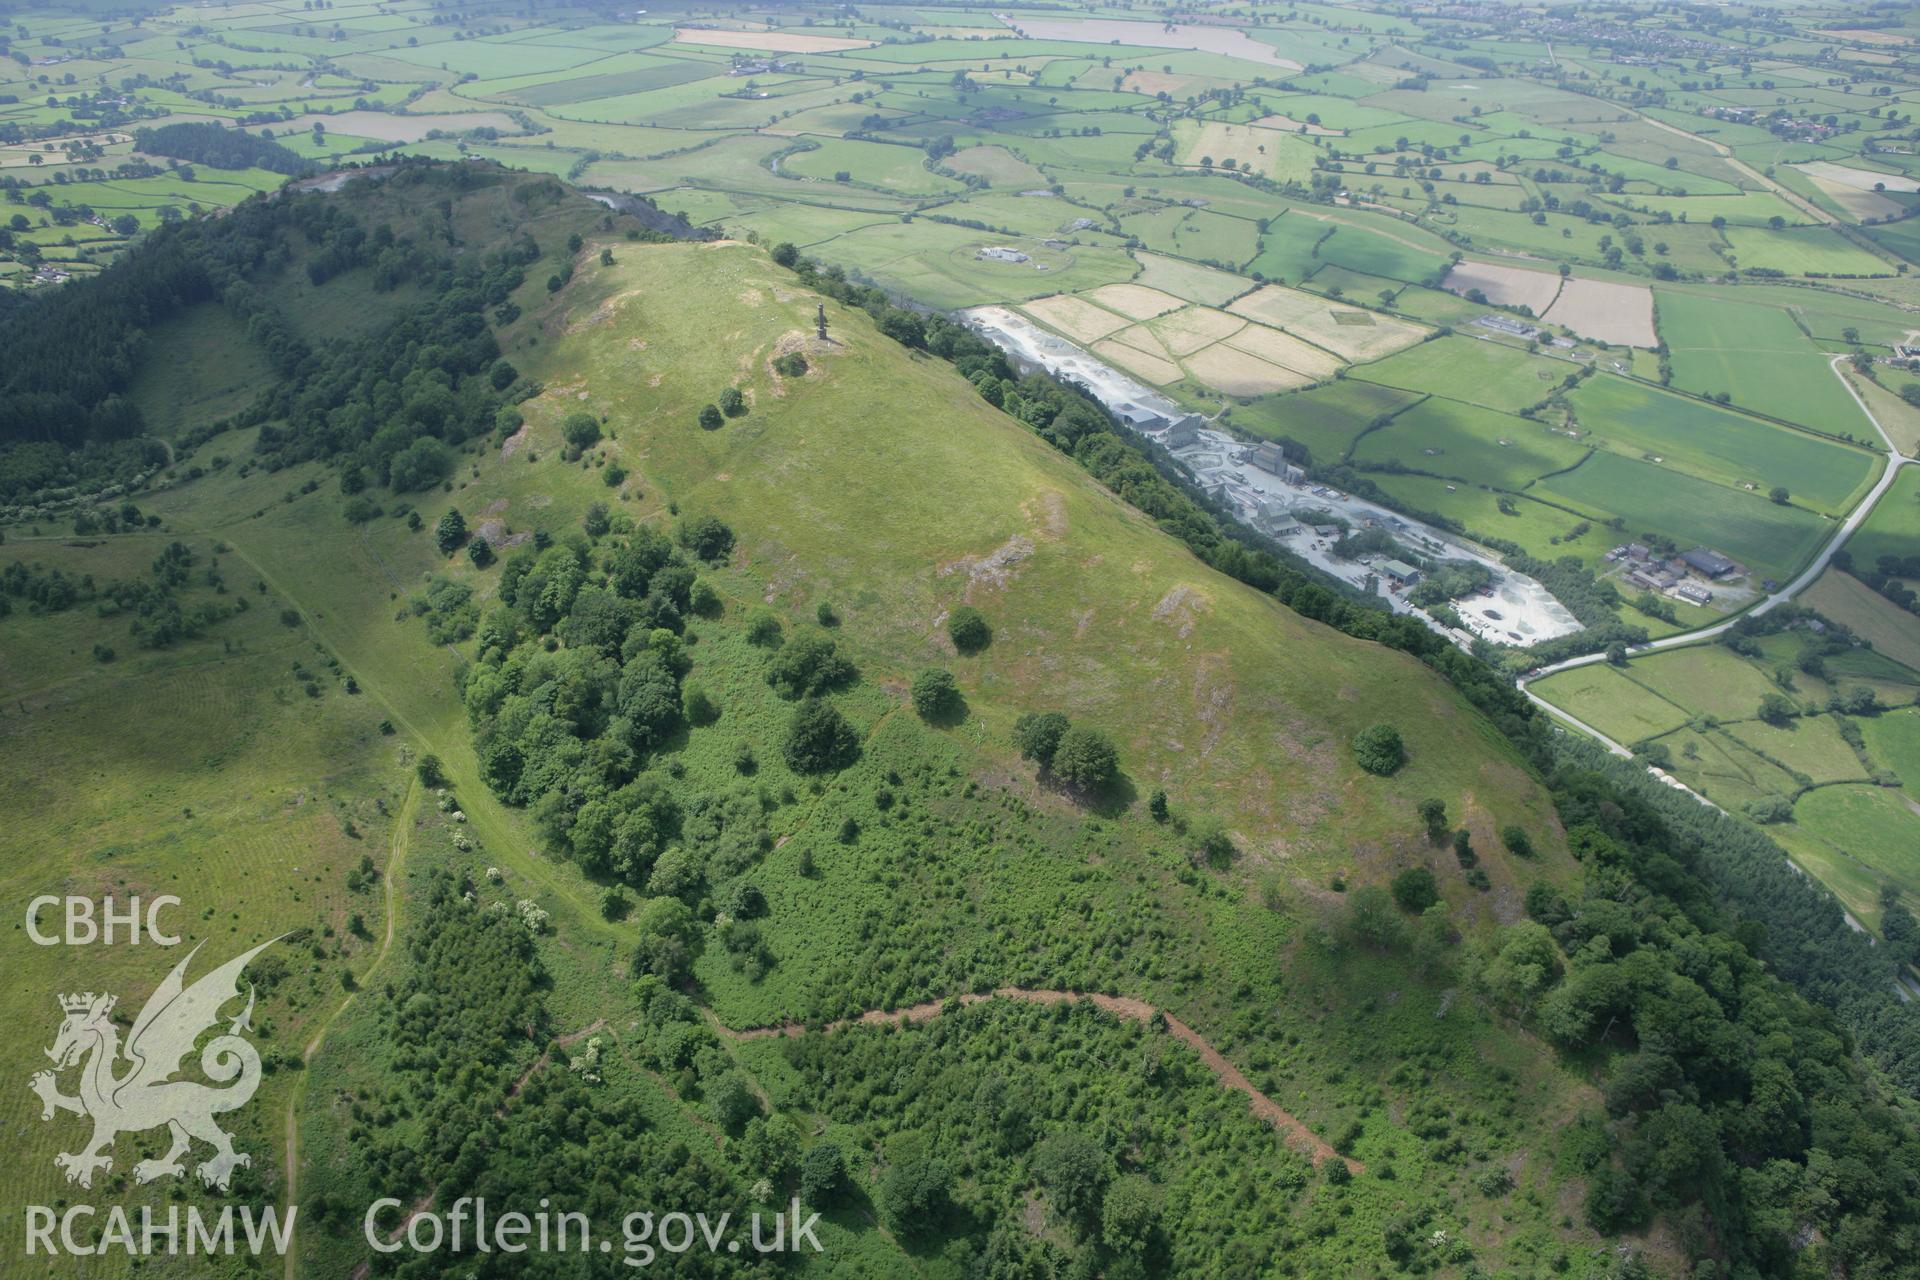 RCAHMW colour oblique photograph of Breddin Hillfort, with Breddin quarry. Taken by Toby Driver on 01/07/2008.